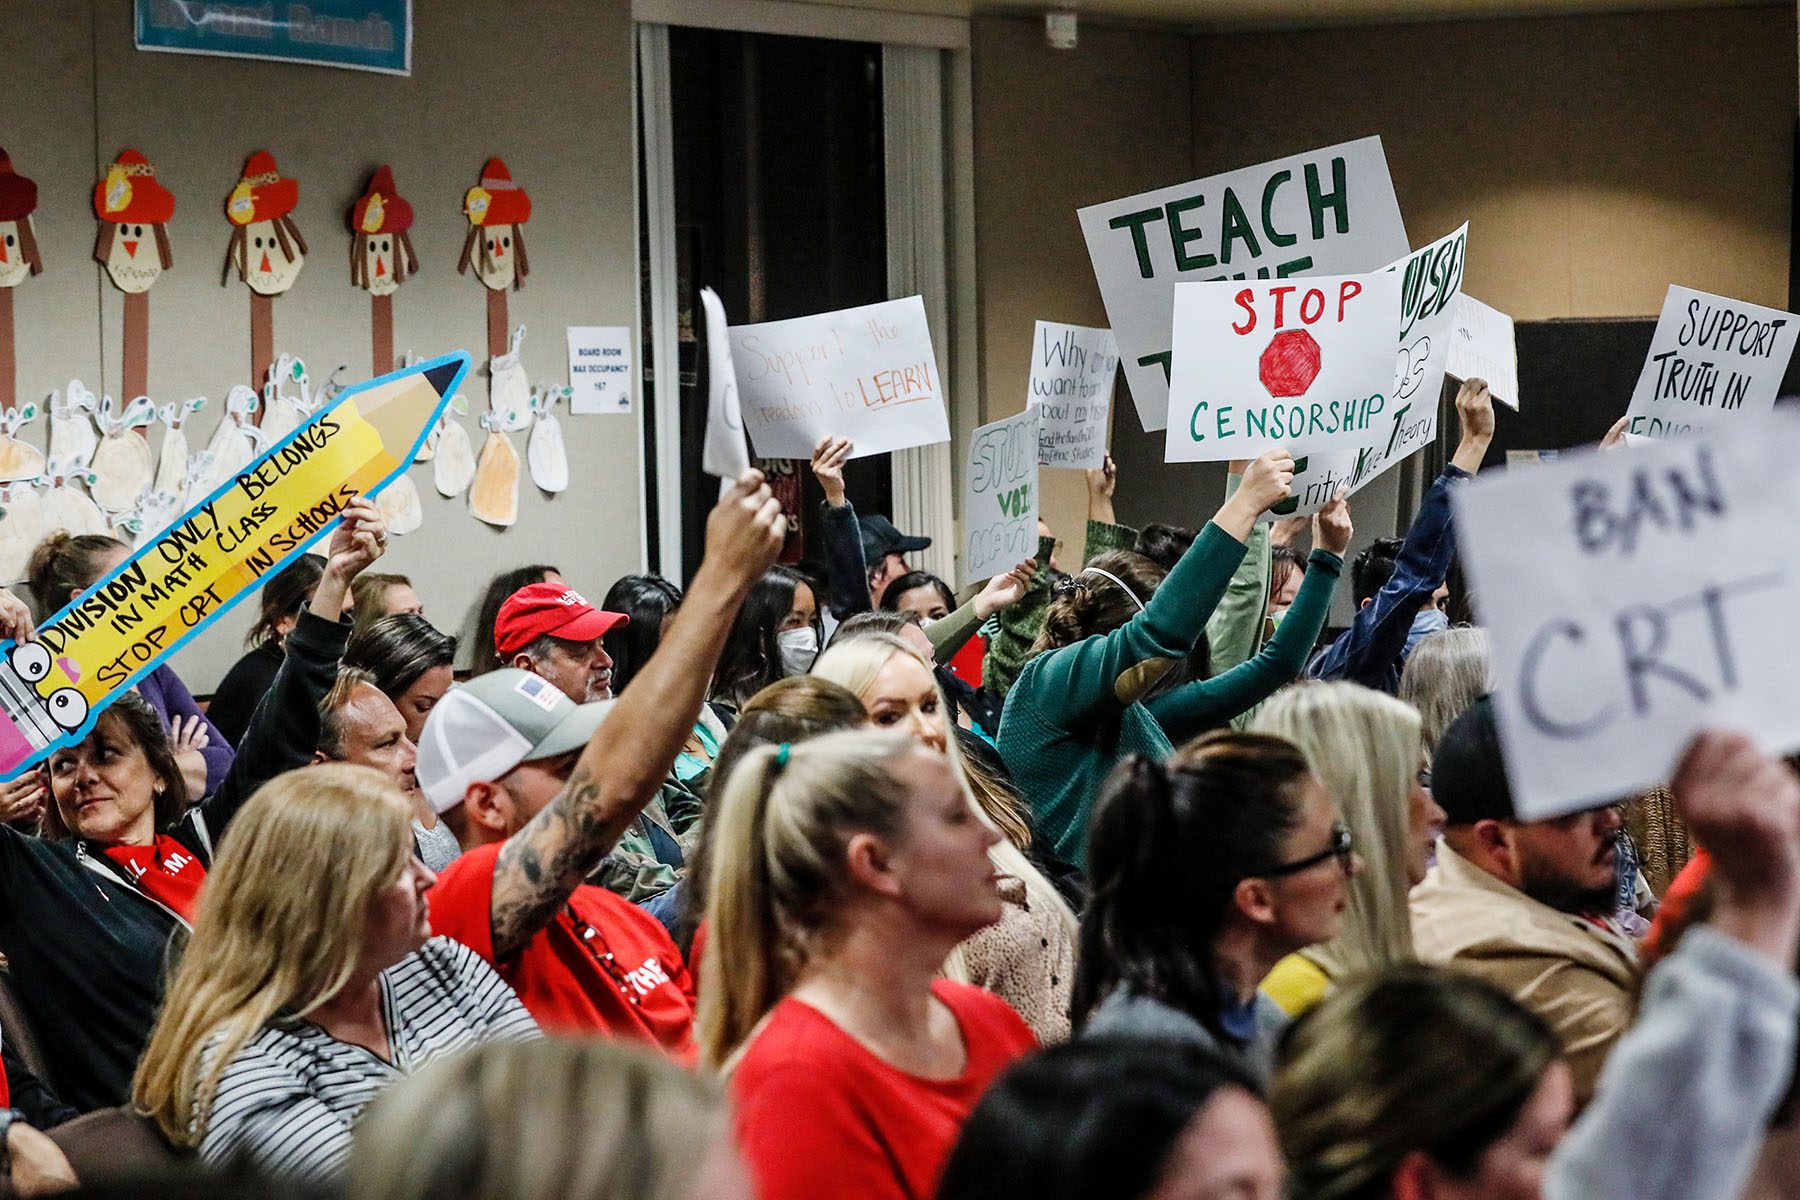 Parents attend a school board meeting to discuss Critical Race Theory. Some hold signs that read "Stop Censorship," "Ban CTR," "Support truth in Education."